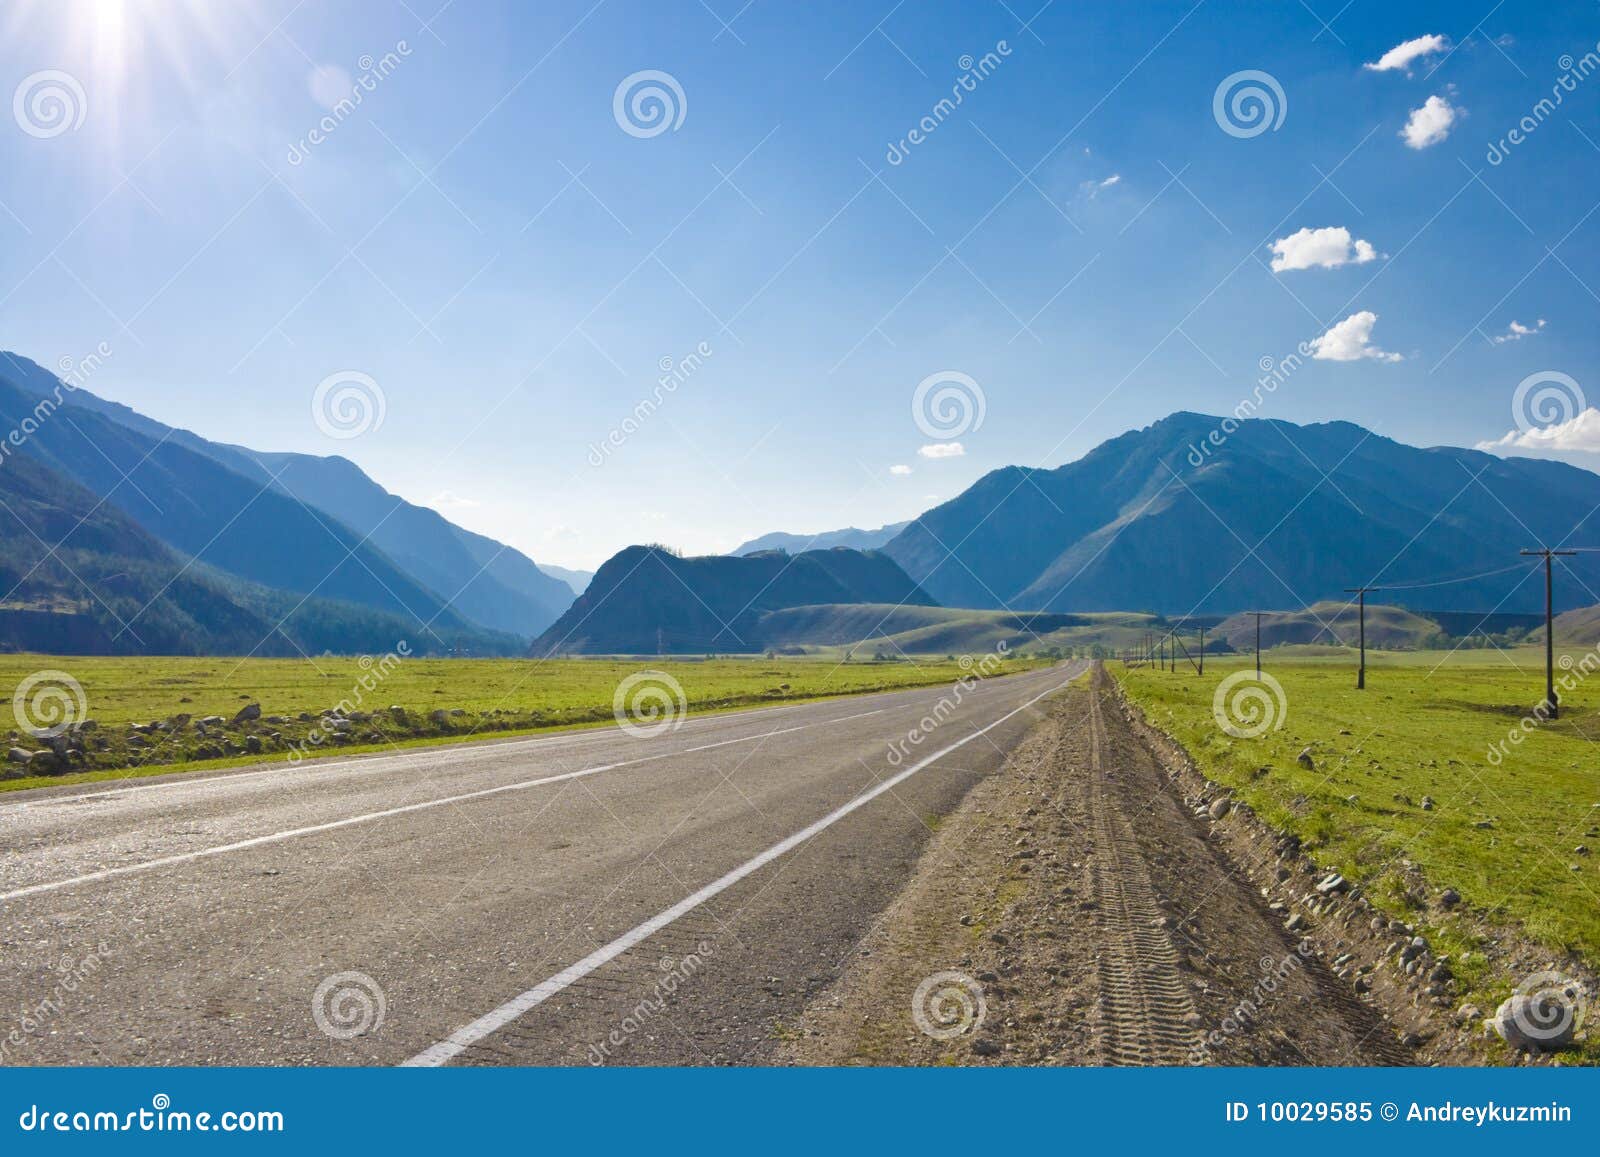 road in mountains valley, altai, summer